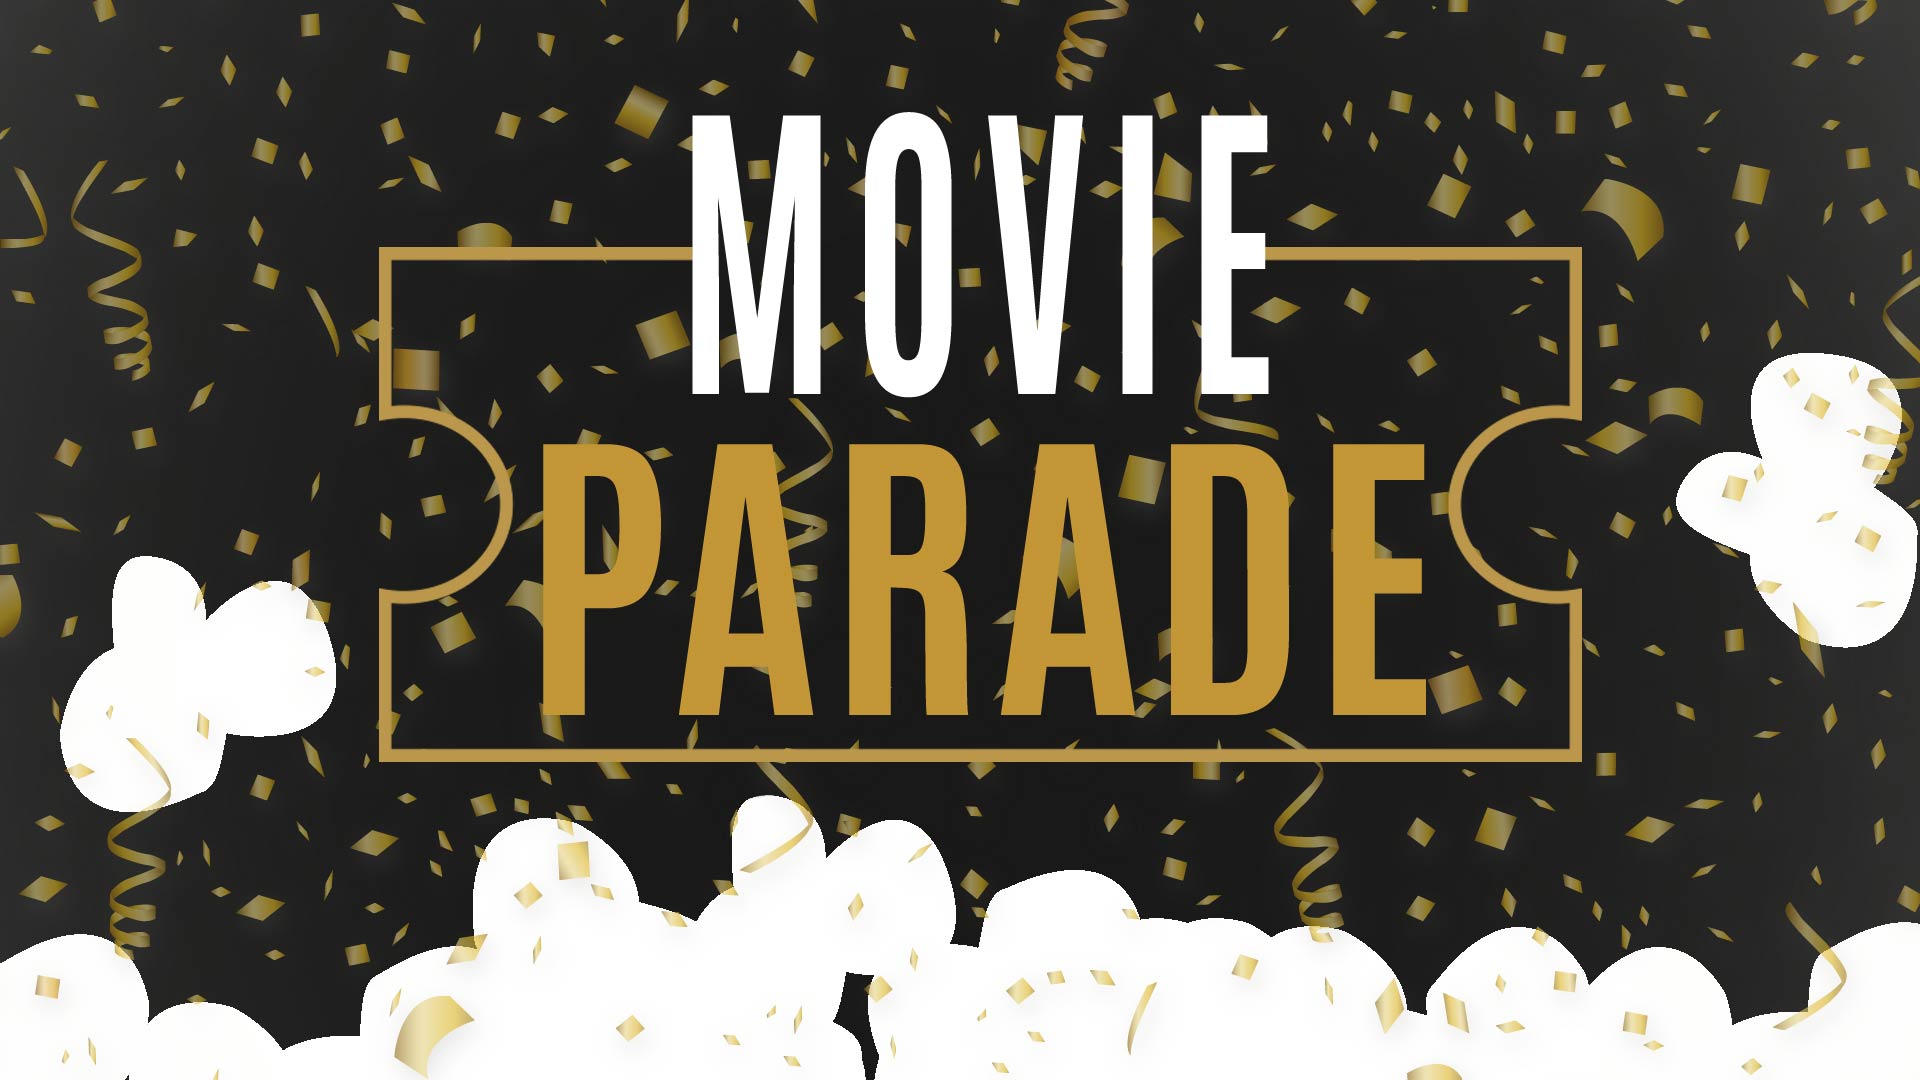 Whitewater Movie Parade | Whitewater Crossing